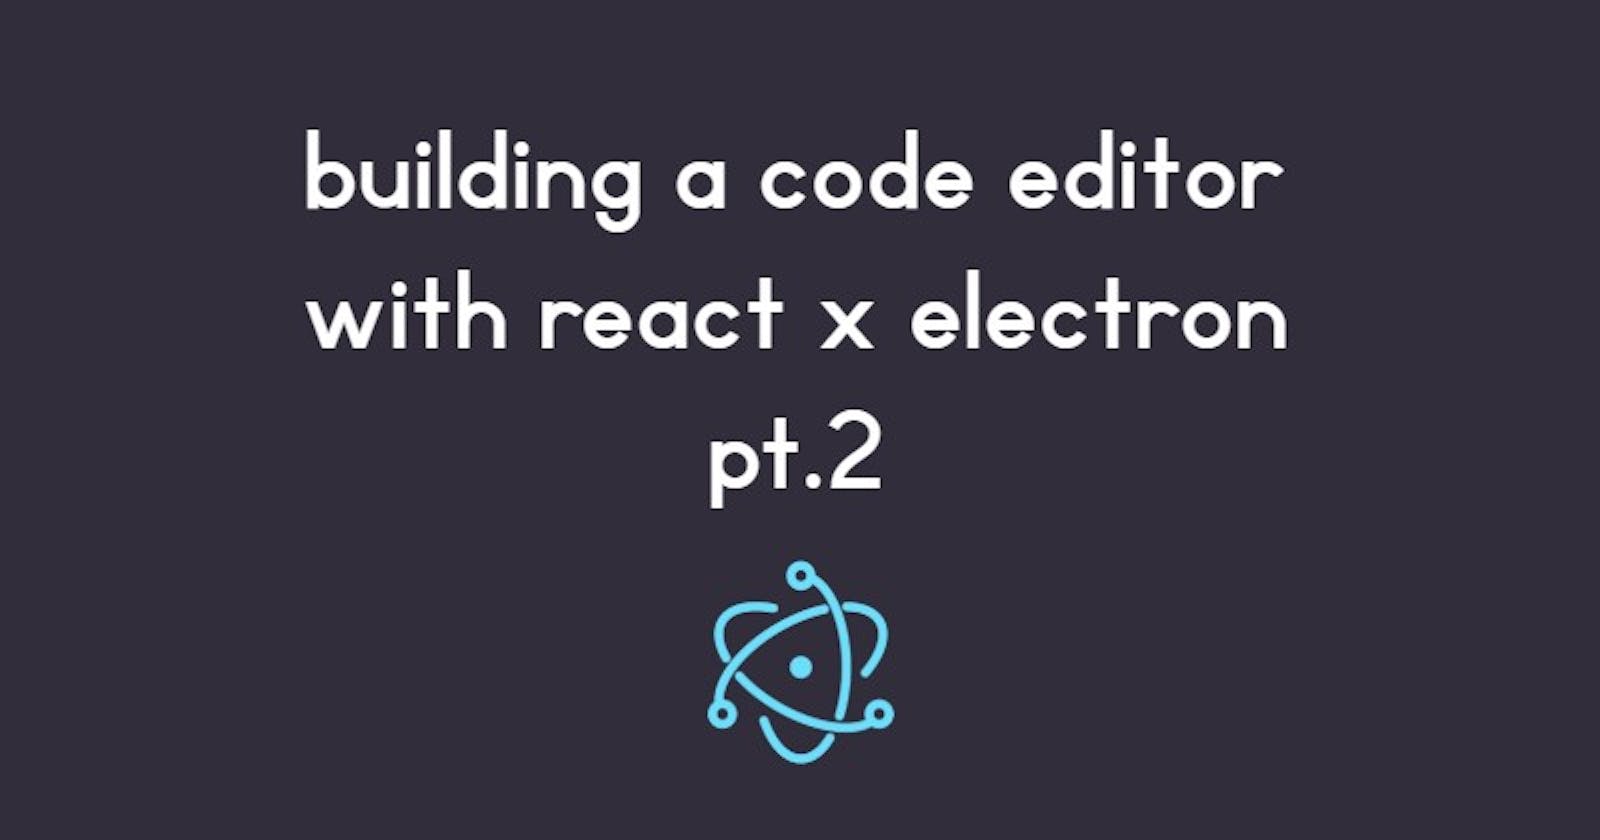 Building a react x electron code editor pt.2 - lexical analysis and tokenisation